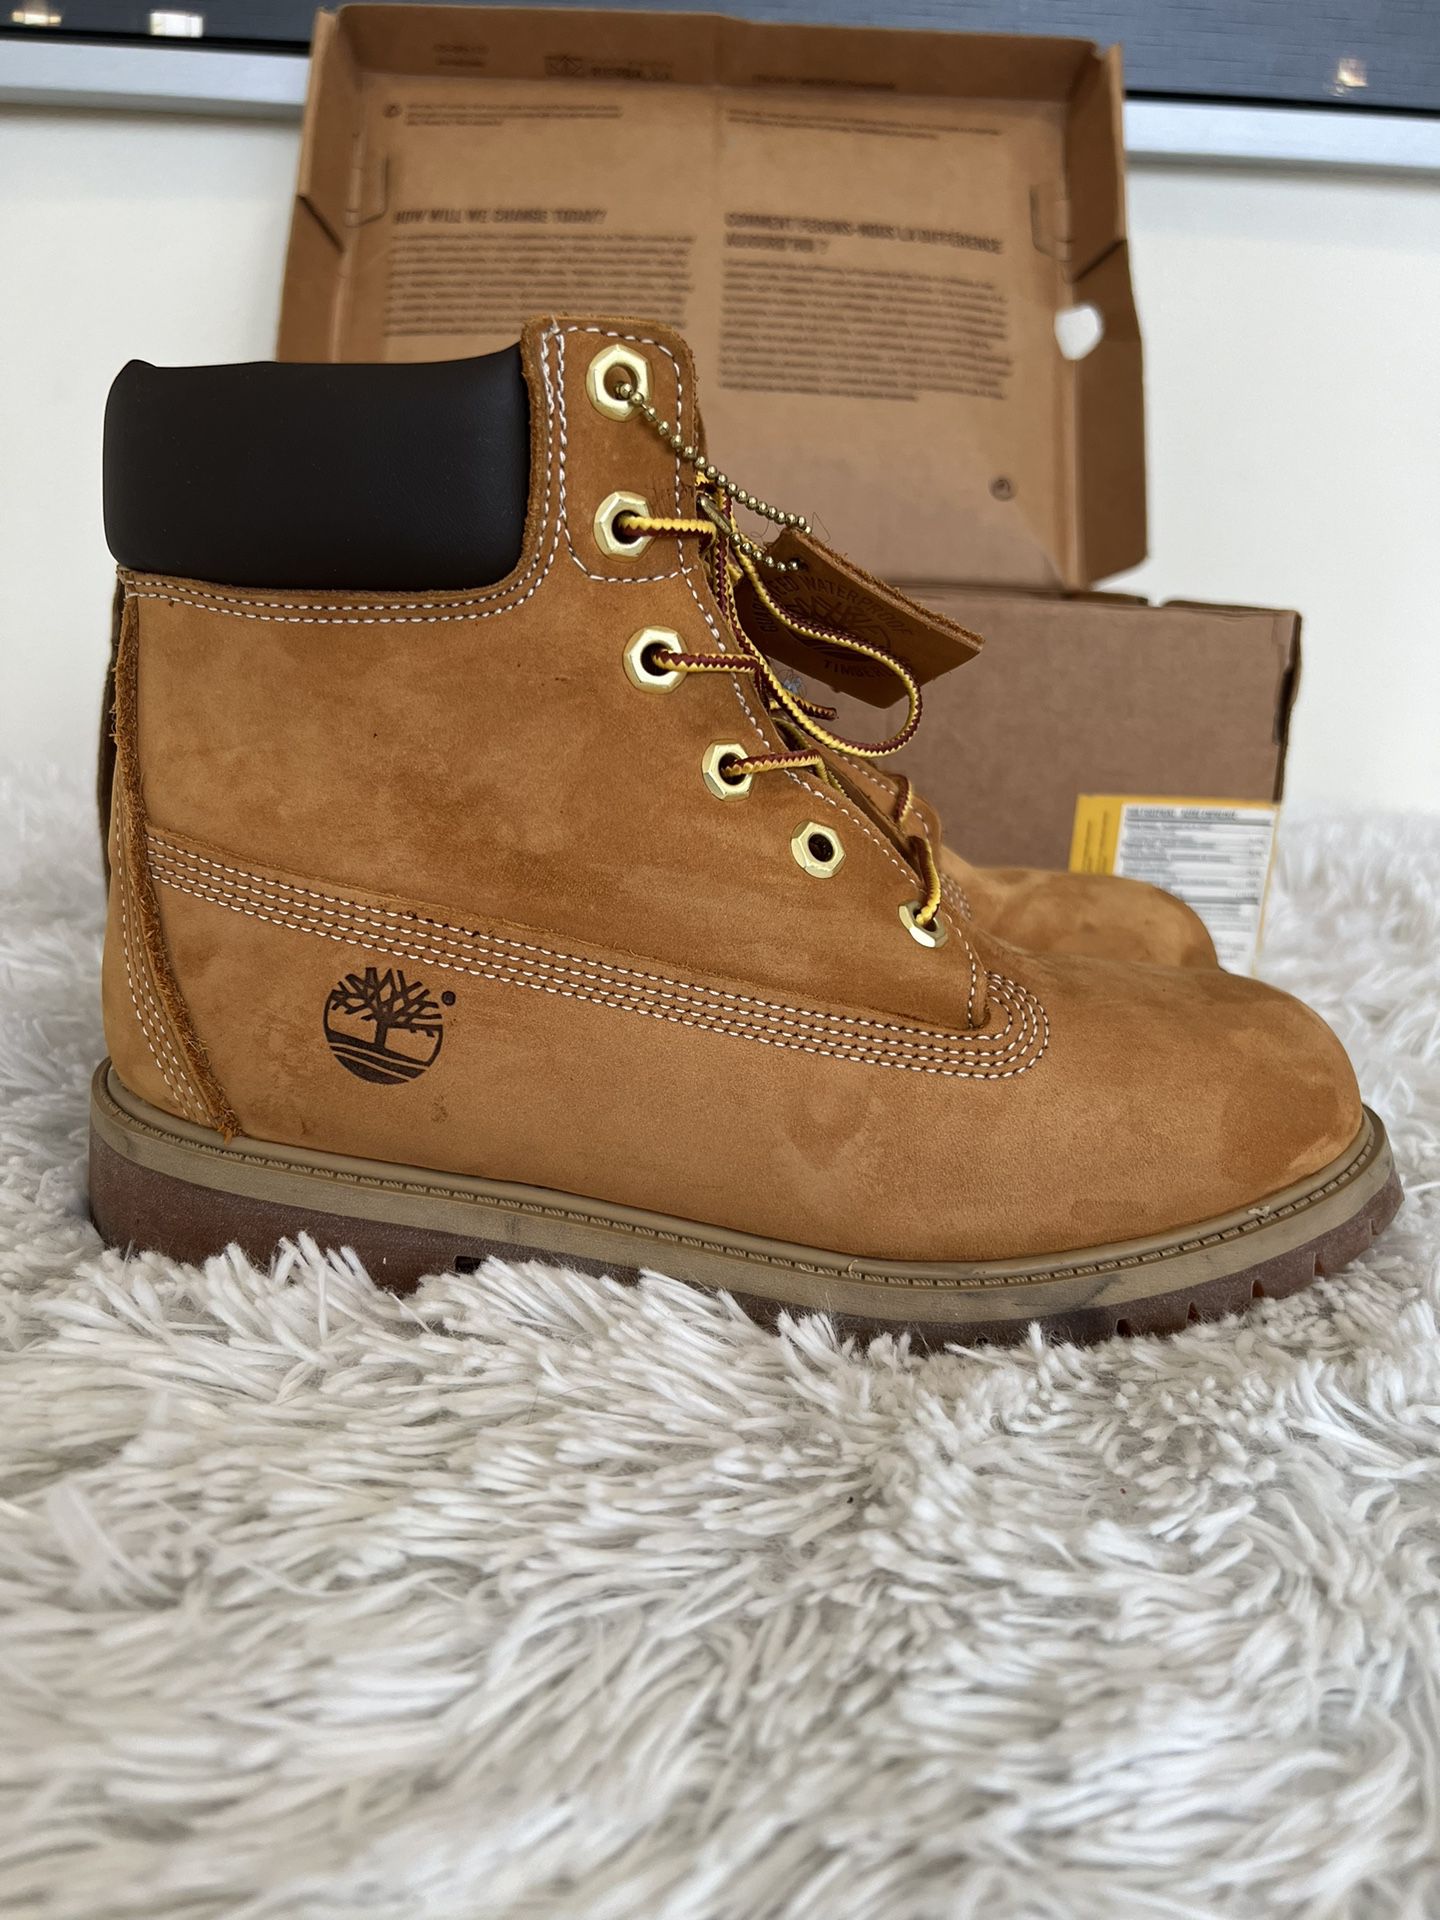 Timberland Boots “Classics”Size 6Y $30.00